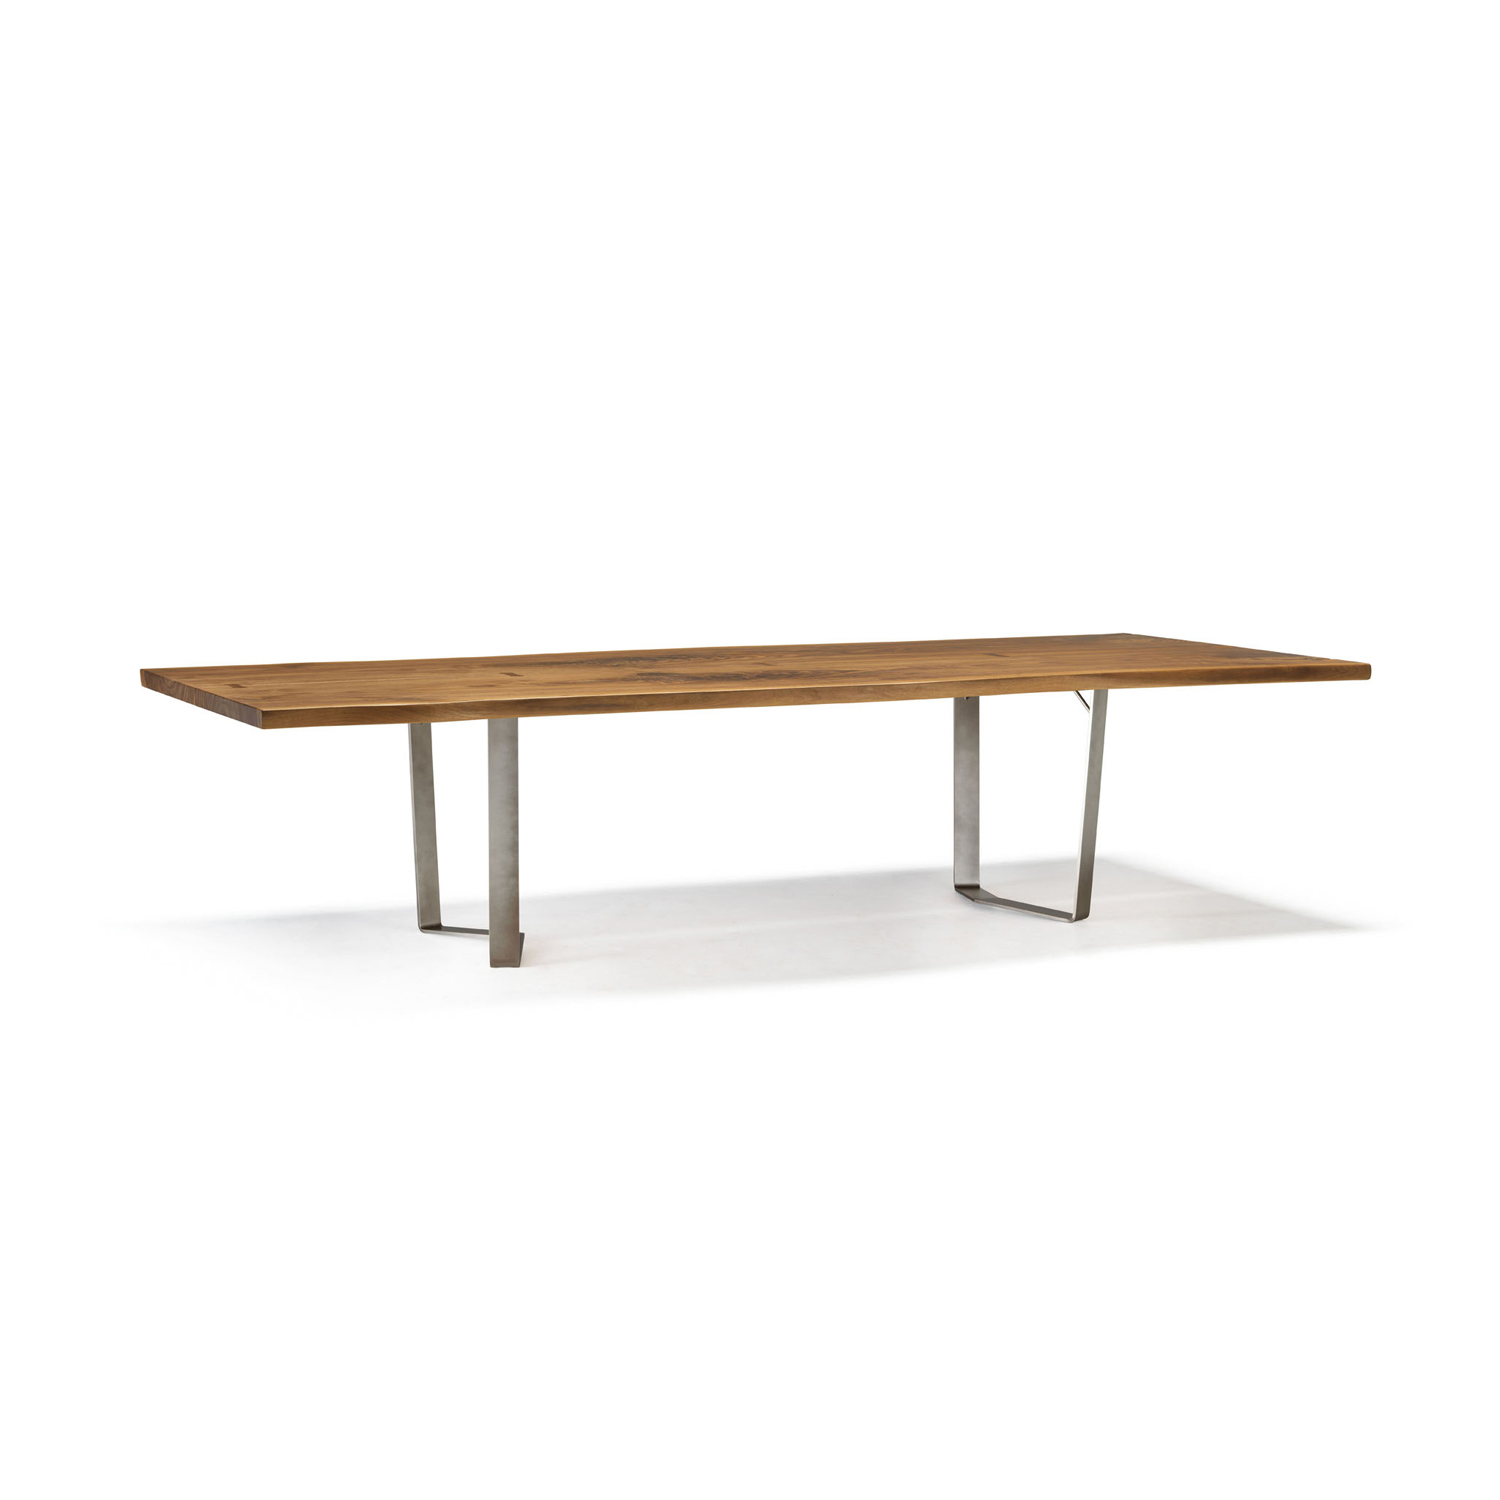 Vero Table with GM01 metal legs